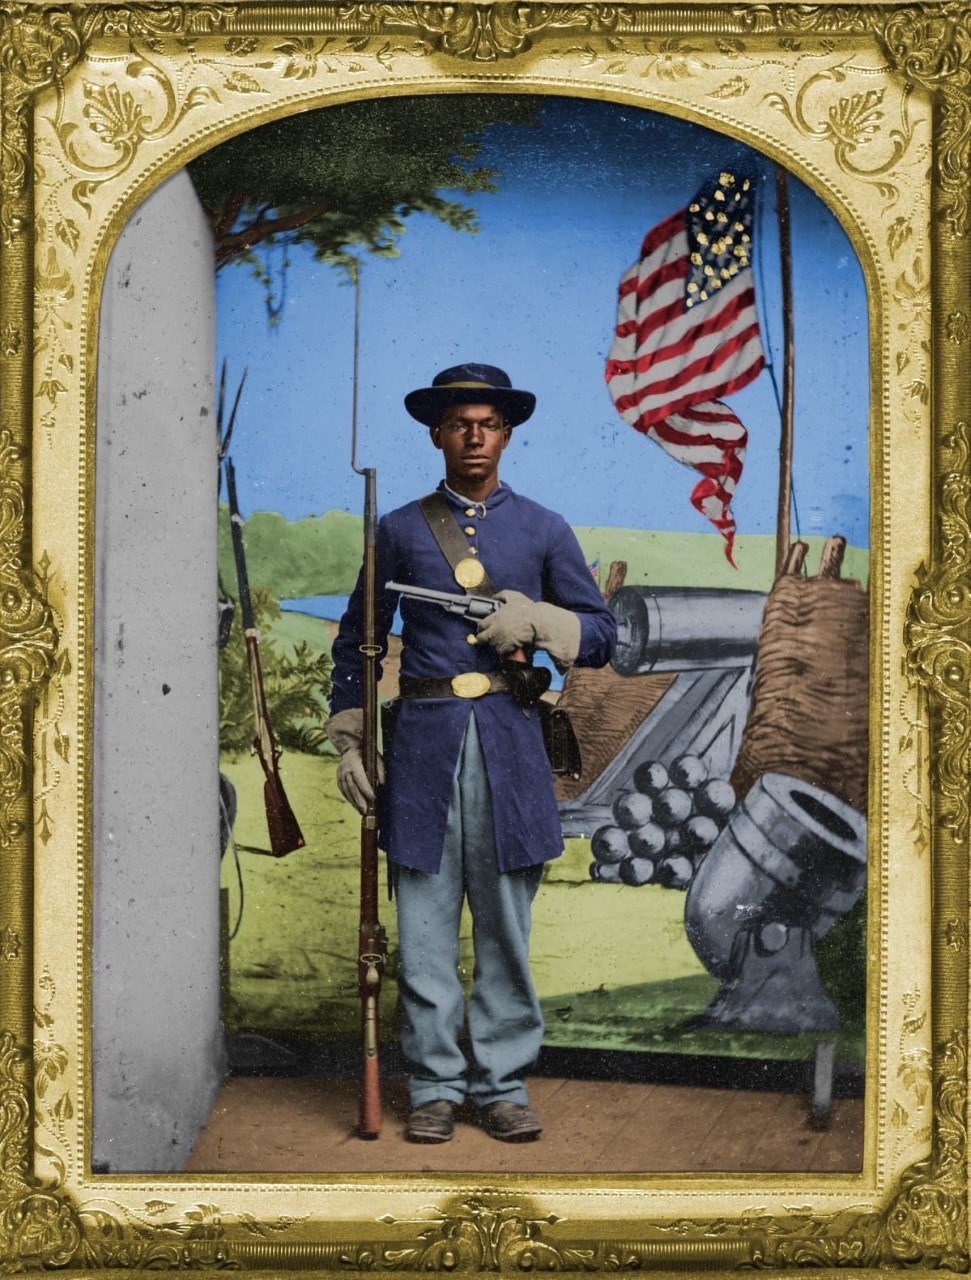 The Civil War and Emancipation in St. Louis (U.S. National Park Service)